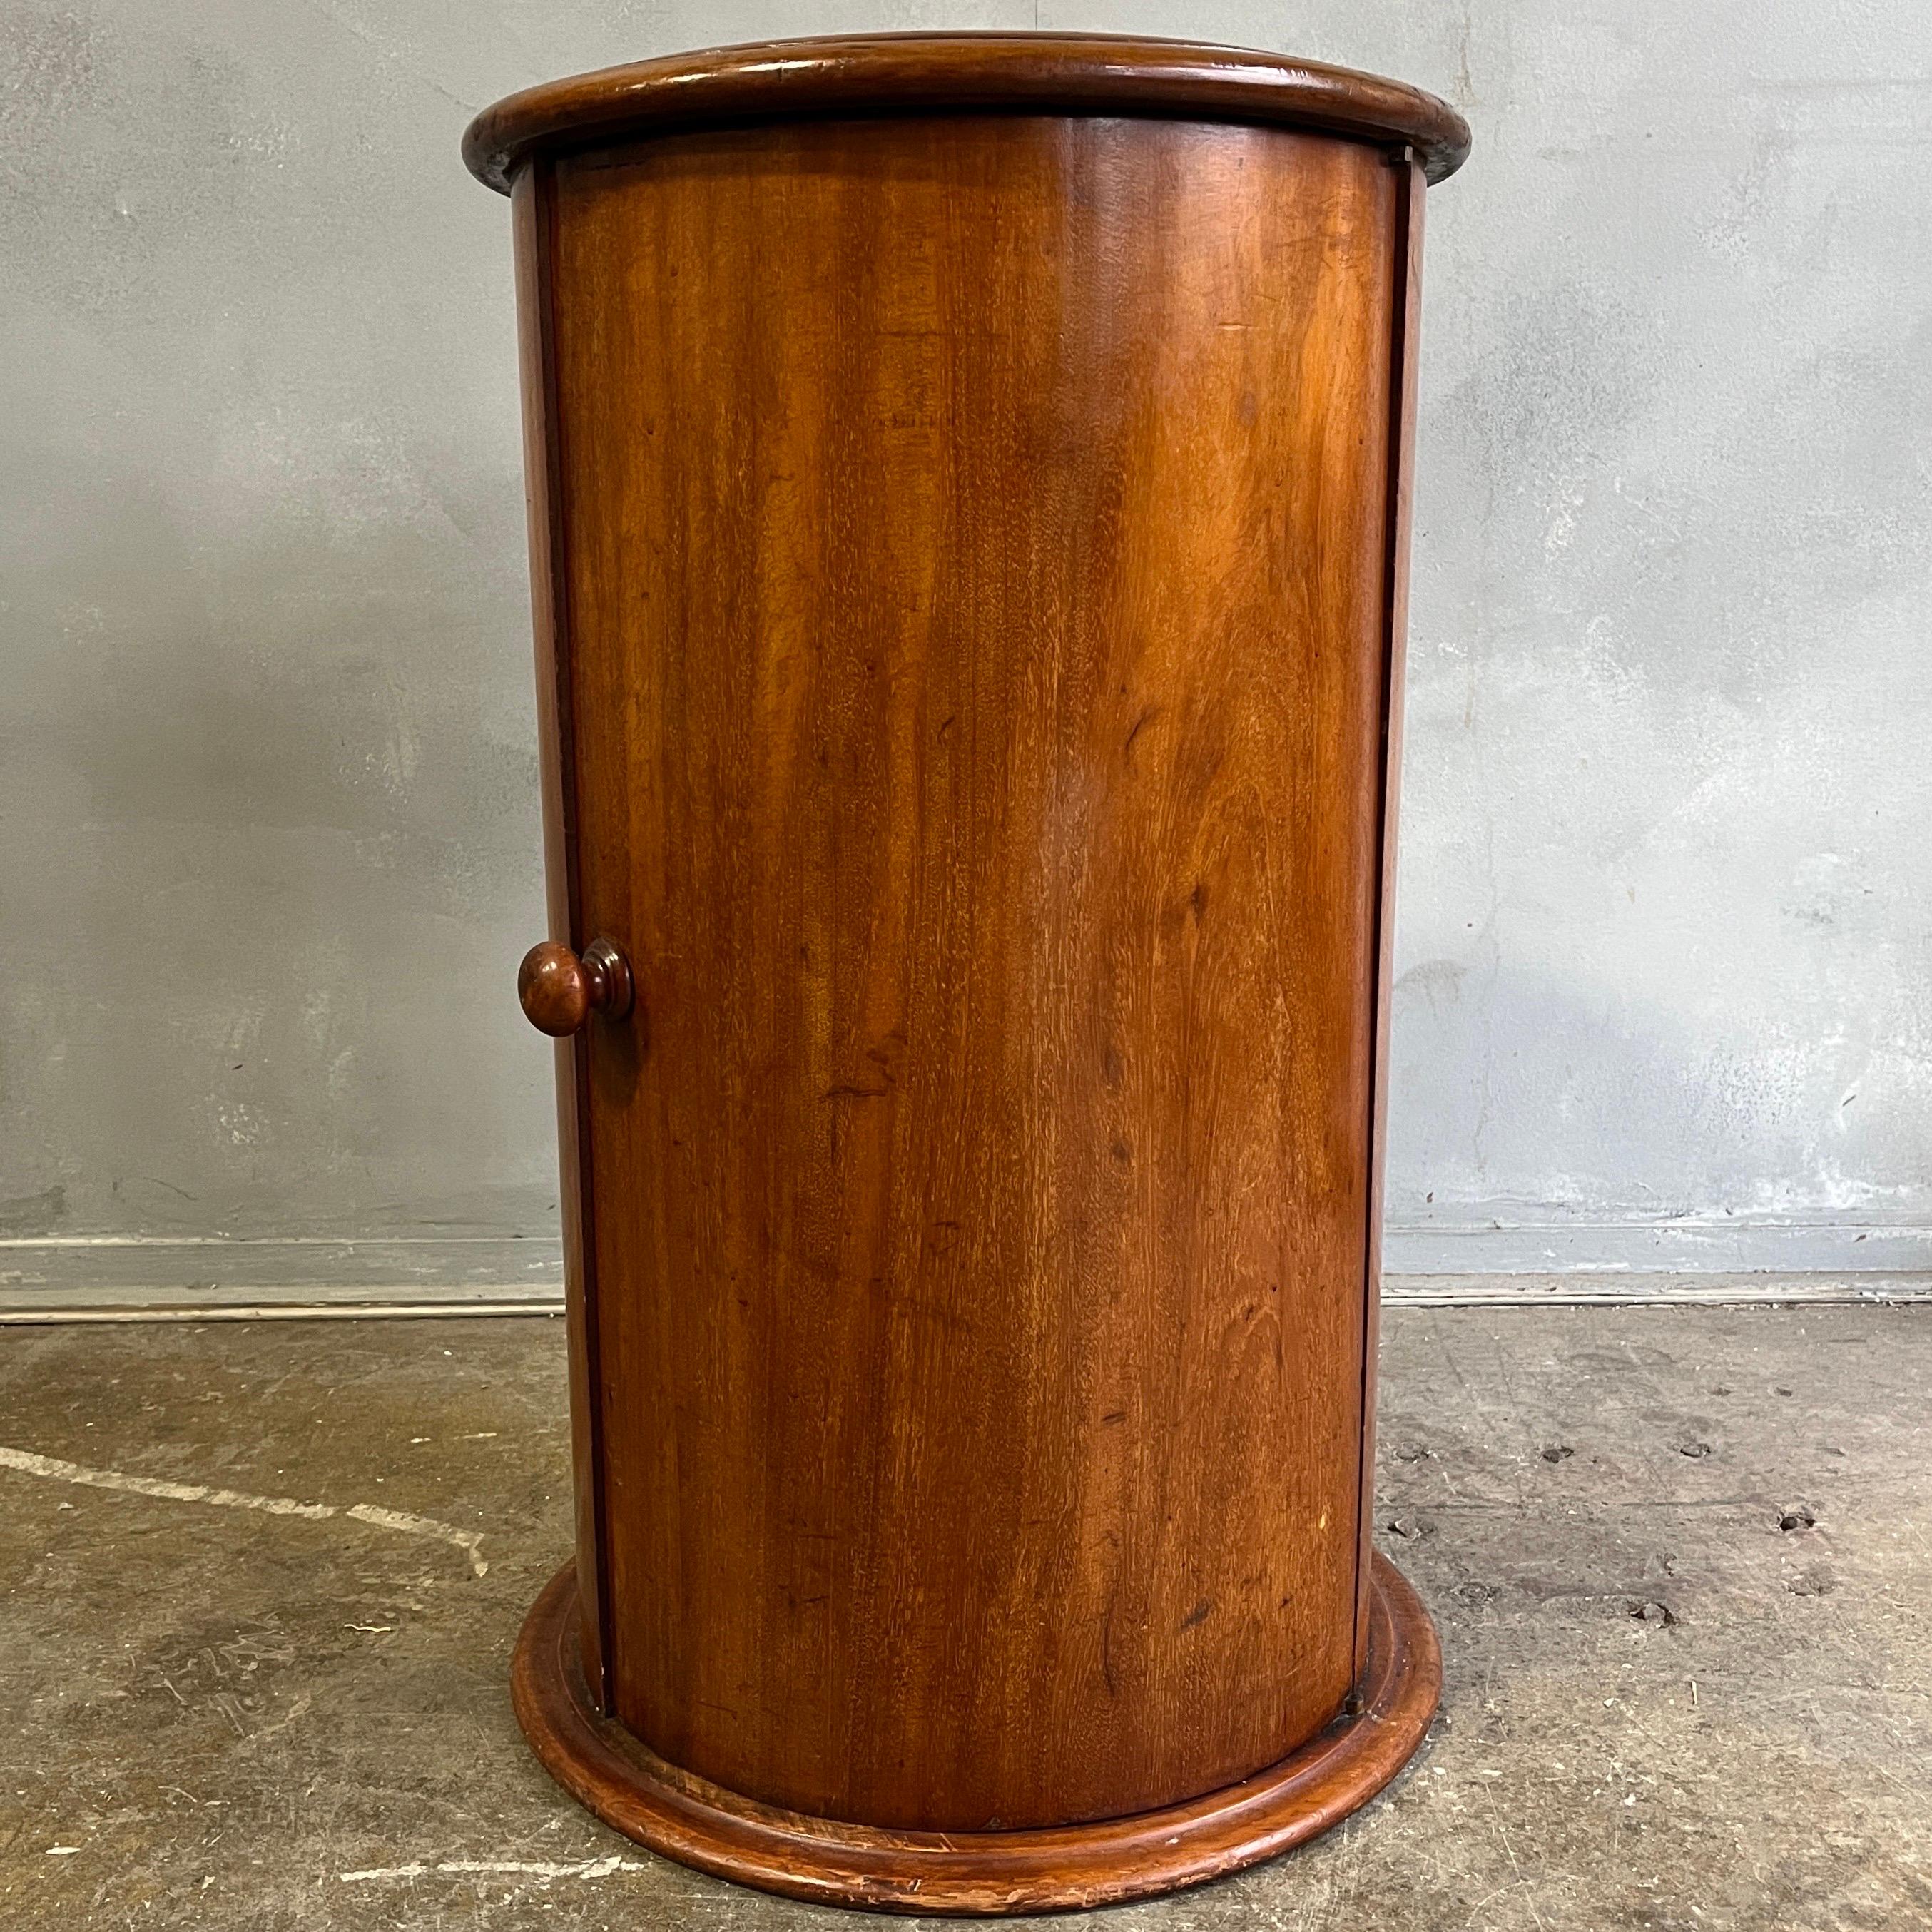 French, 19th century veneered wood somneau, somno, or drum table having a circular top inset with white marble above a conforming cylindrical body with single door opening to a shelved interior on circular plinth base. beautiful original patina.